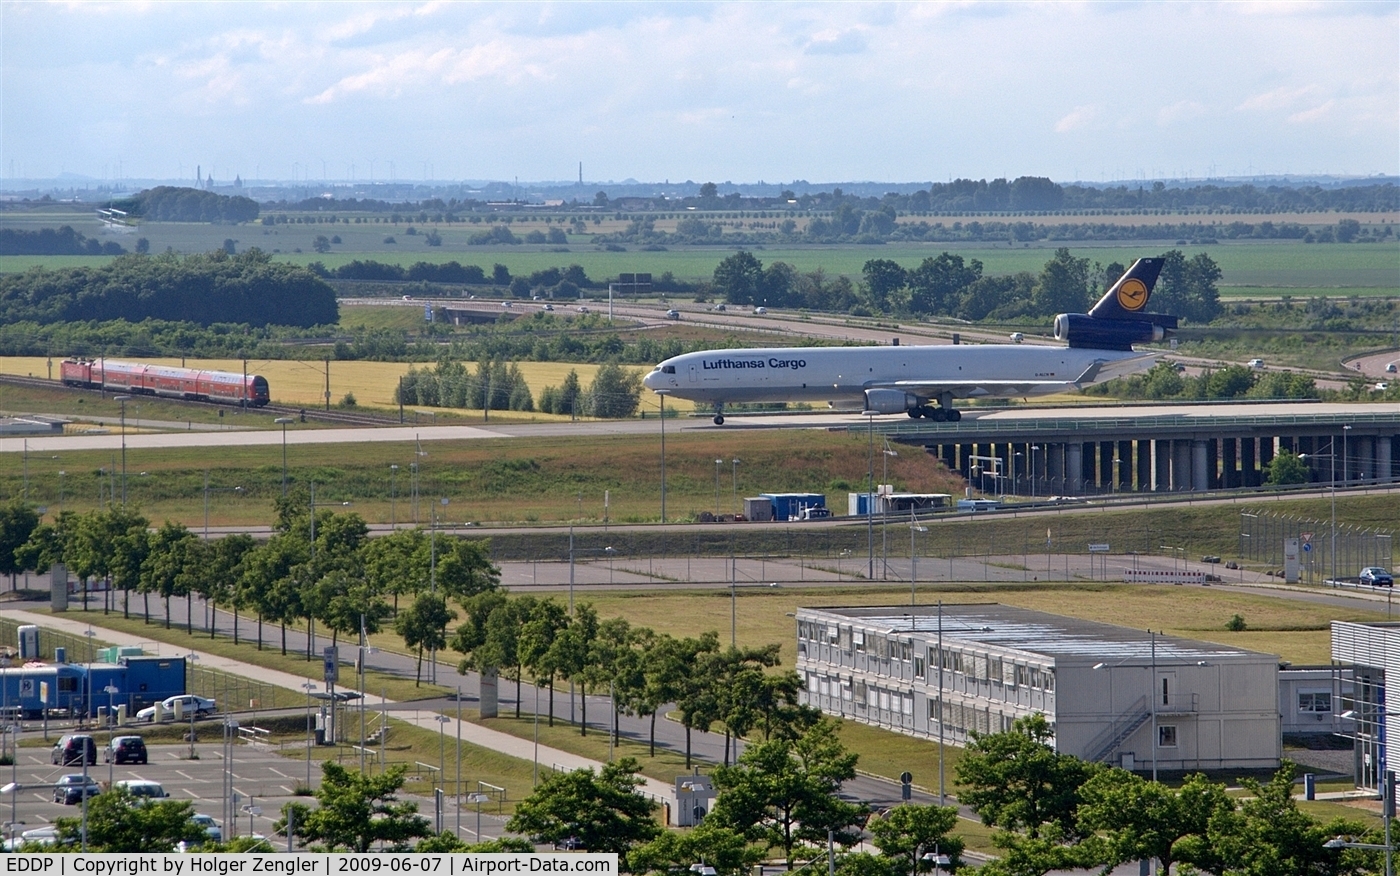 Leipzig/Halle Airport, Leipzig/Halle Germany (EDDP) - Western view from visitor´s terrace to inbound traffic on Autobahn rolling bridge....